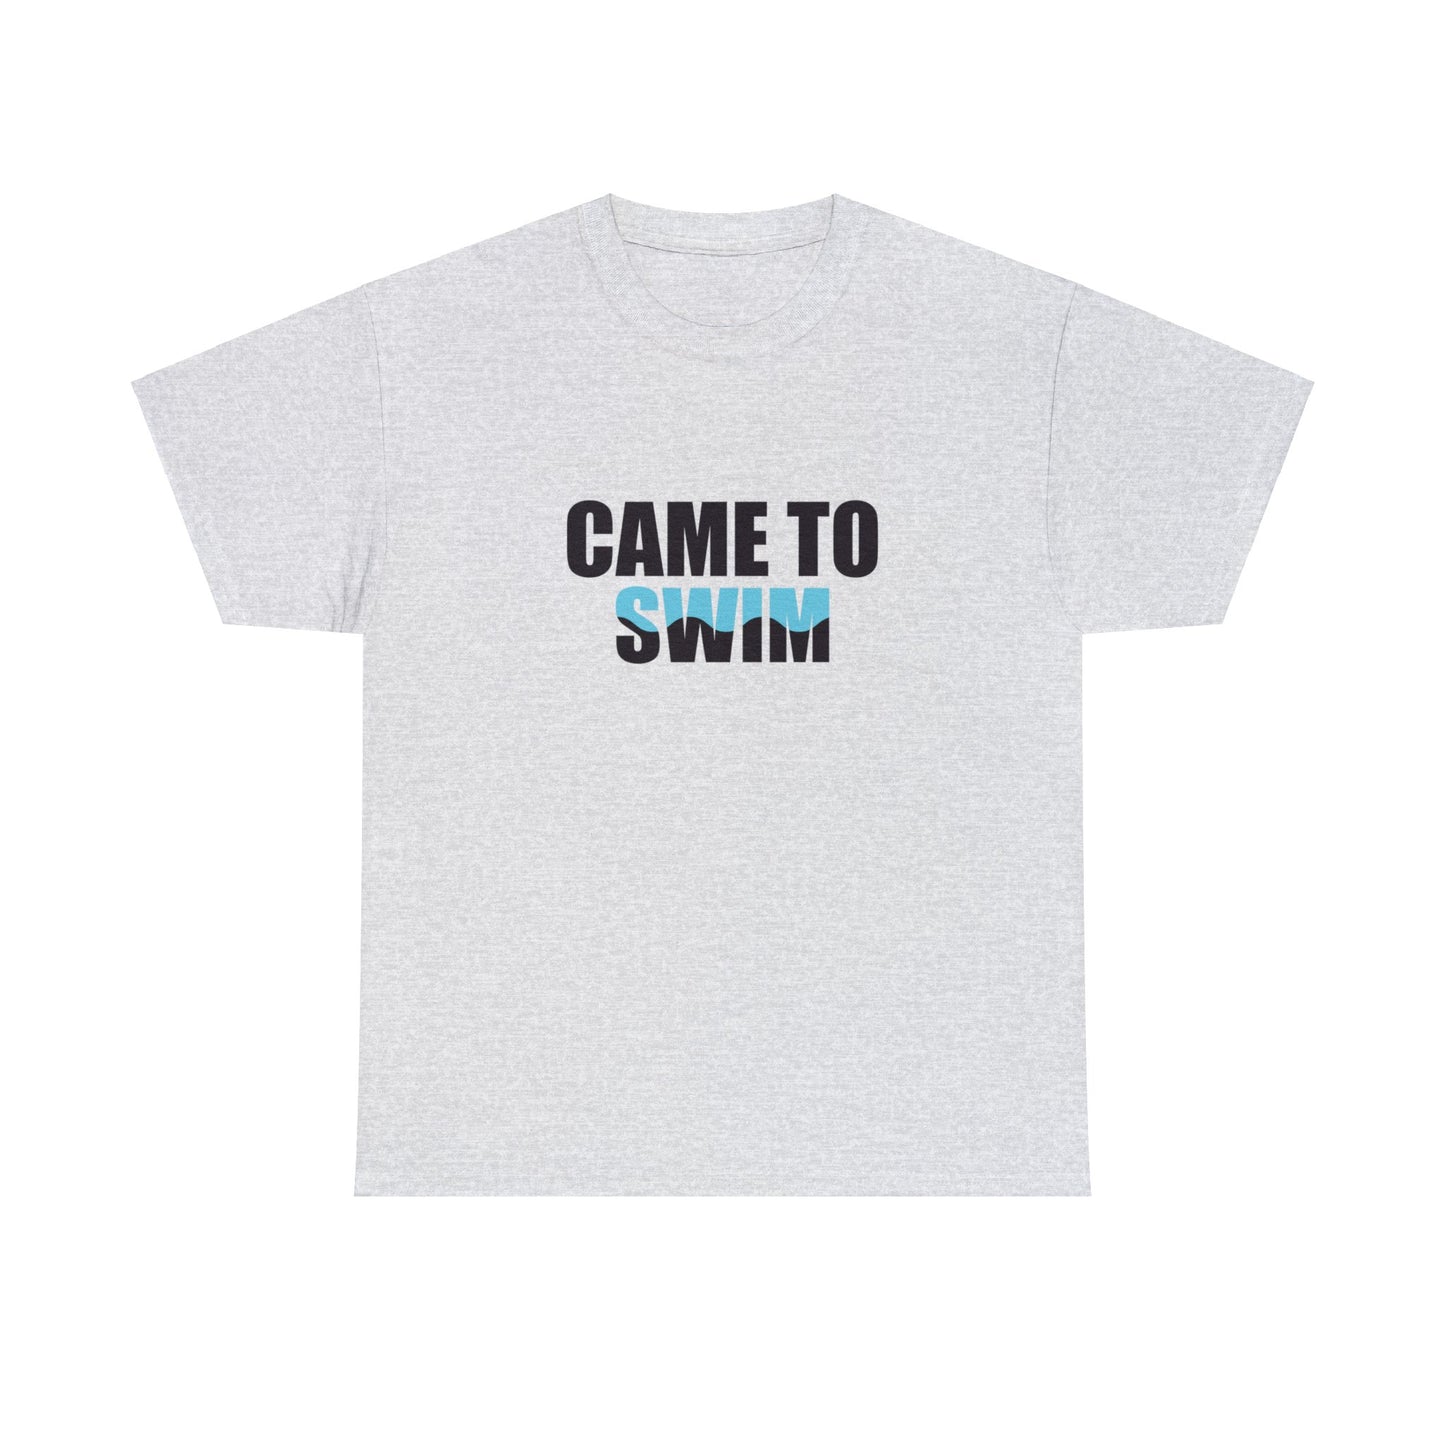 "CAME TO SWIM" Text T-shirt Unisex Heavy Cotton Tee Simple Text for Travelers